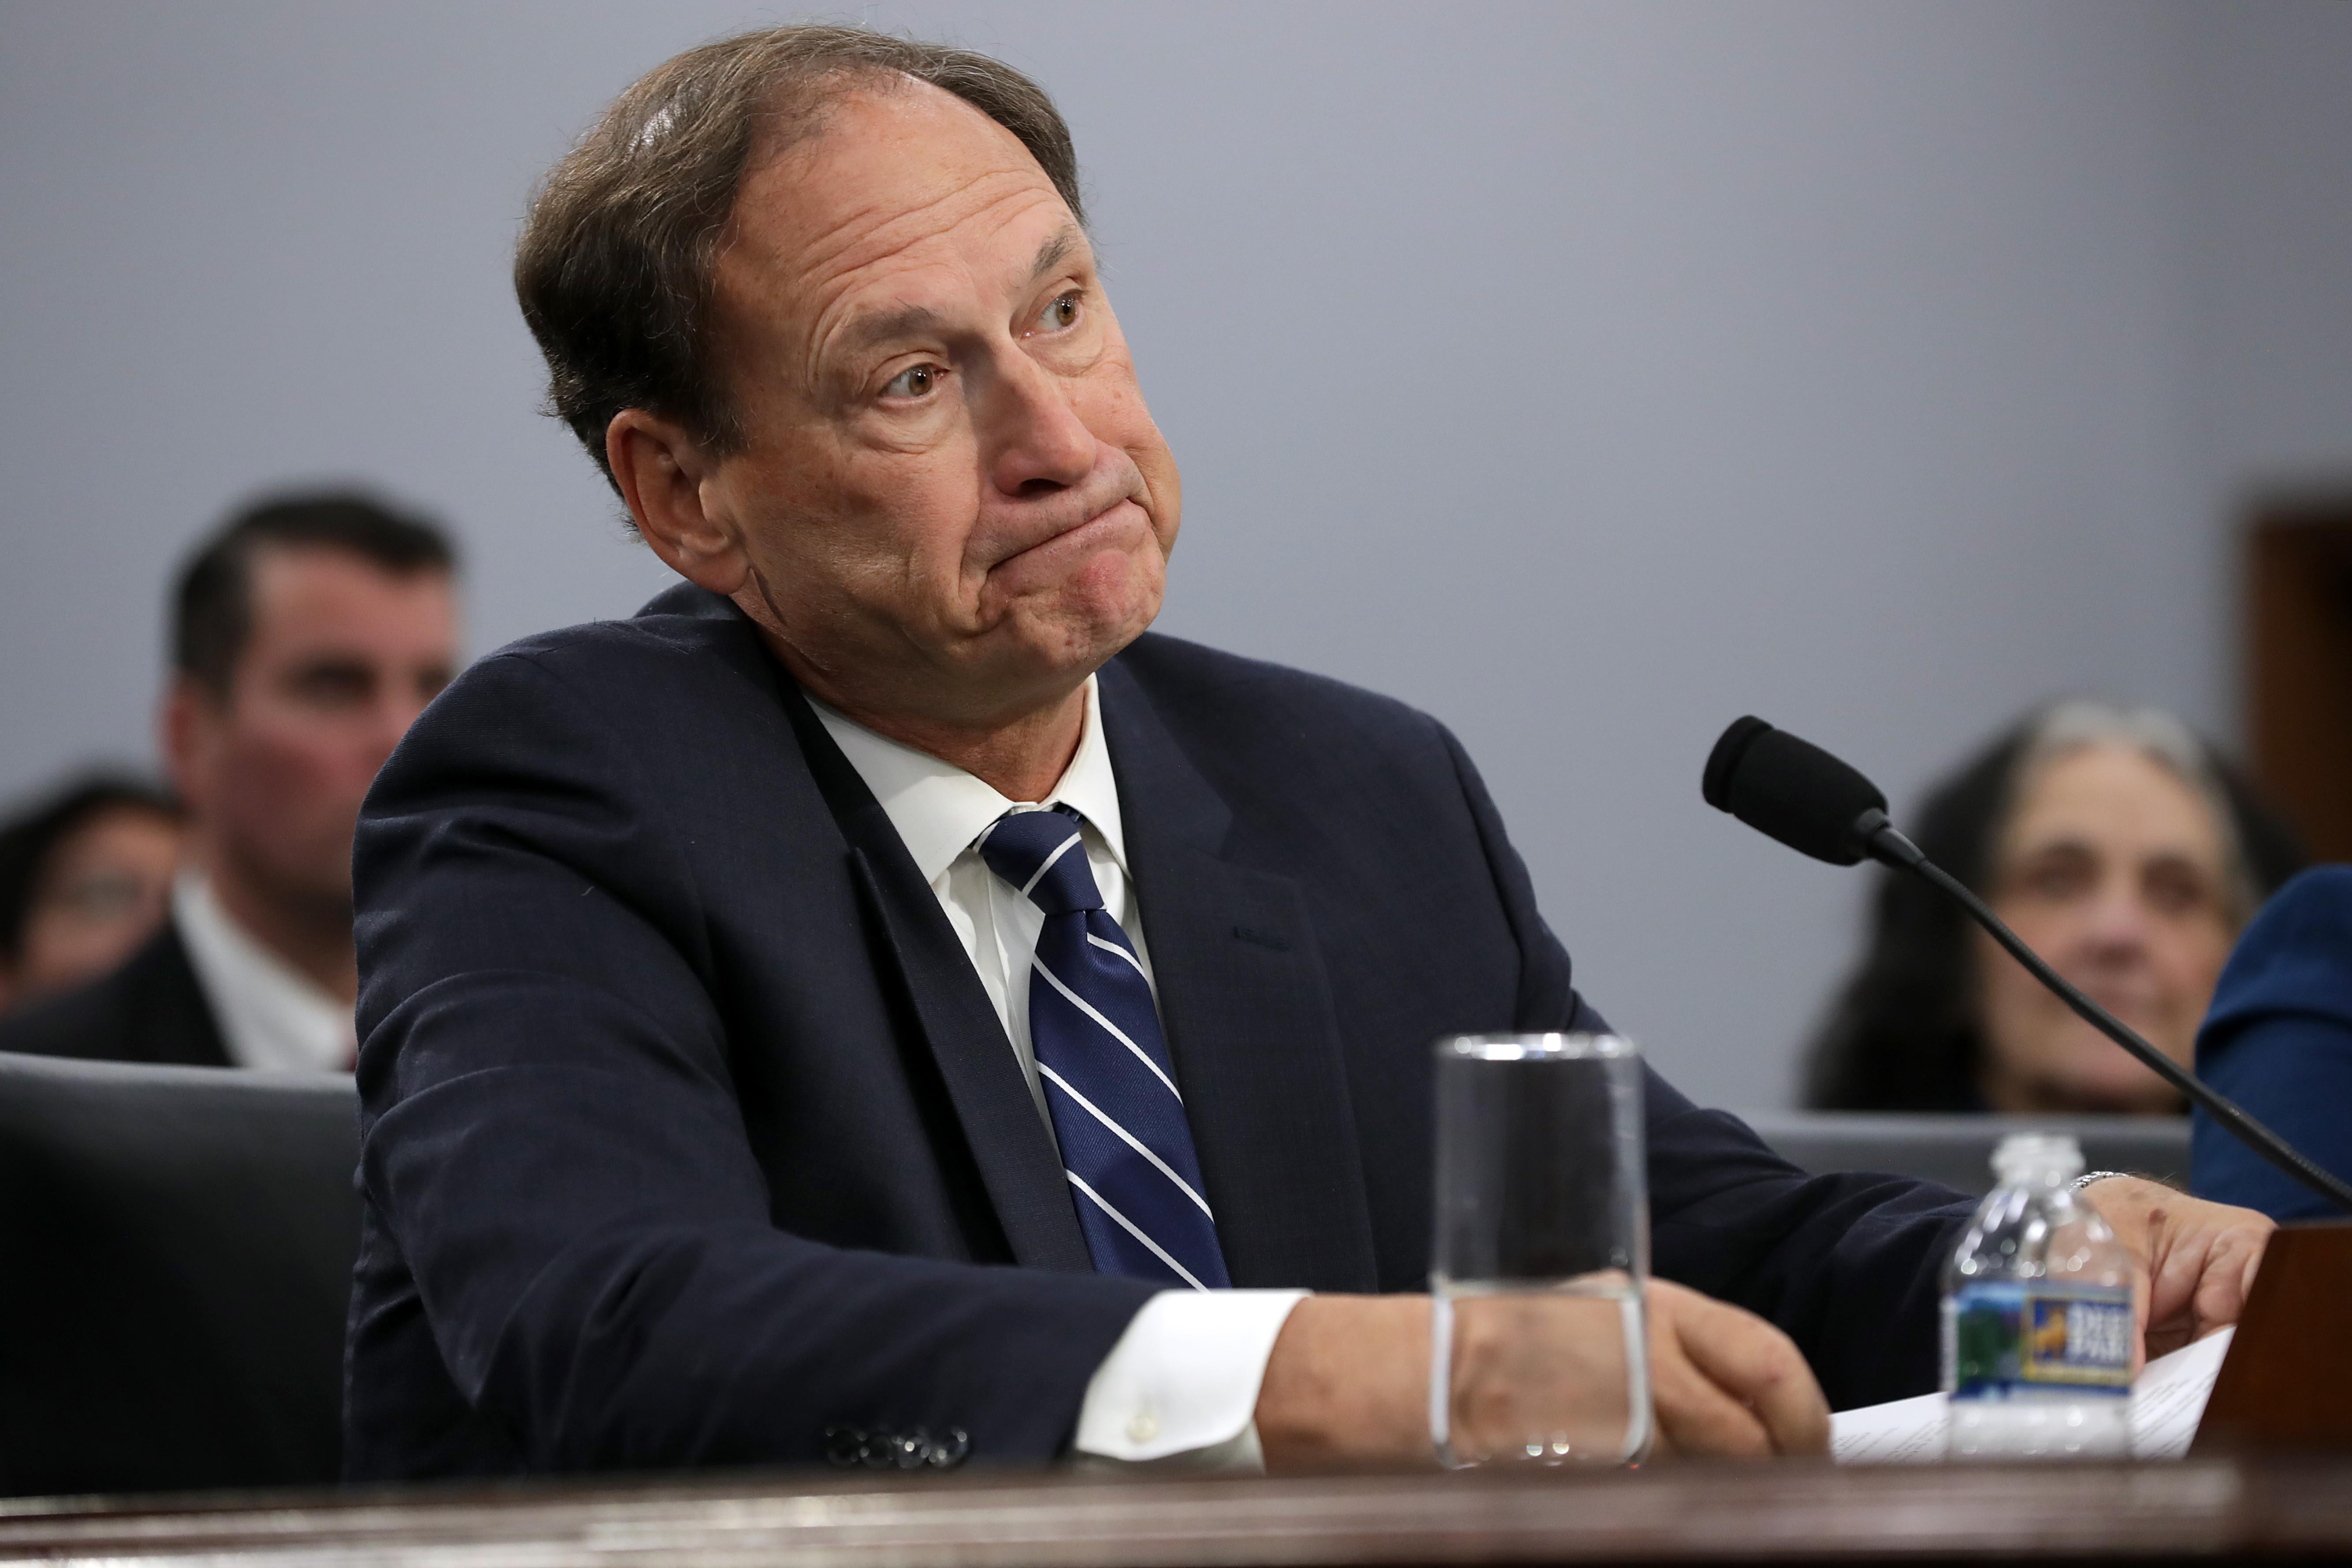 Justice Samuel Alito purses his lips while seated in front of a mic